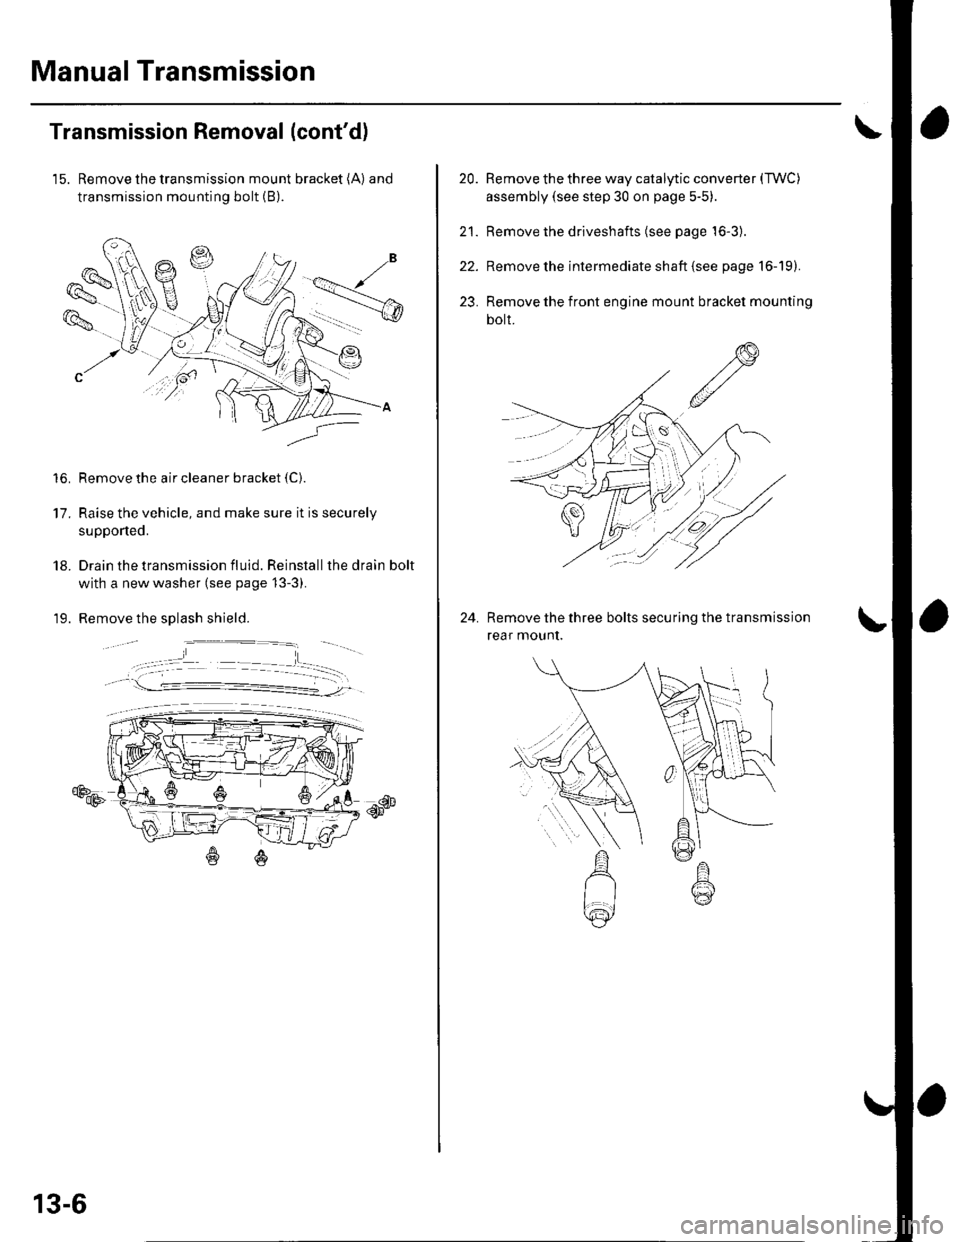 HONDA CIVIC 2002 7.G Owners Guide Manual Transmission
Transmission Removal (contd)
15. Remove the transmission mount bracket (A) and
transmission mounting bolt (B).
Remove the air cleaner bracket {C).
Raise the vehicle, and make sure